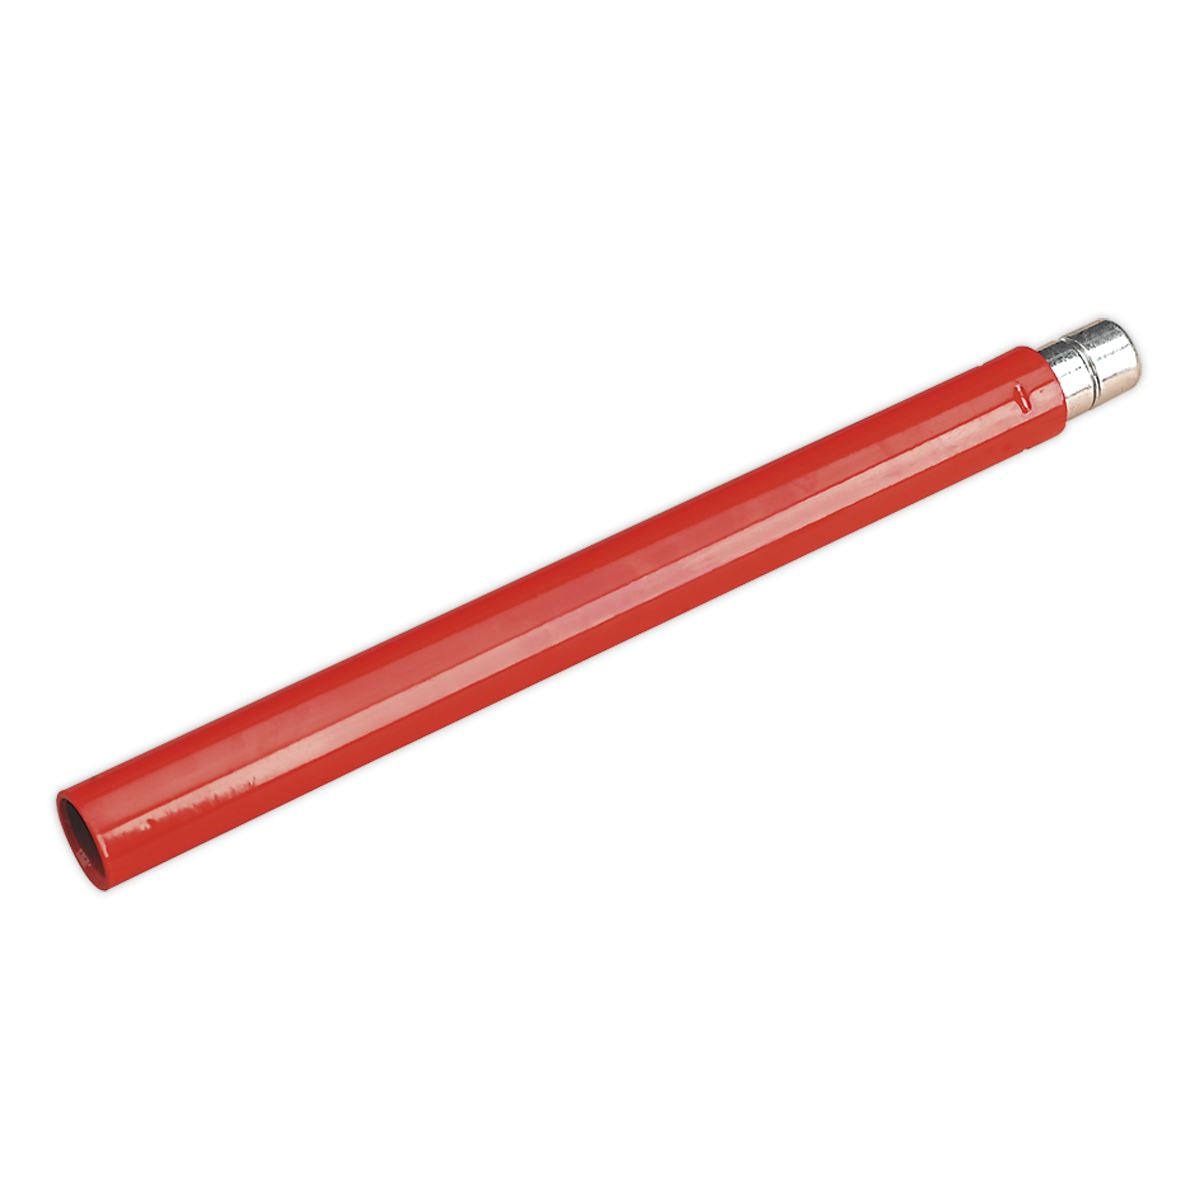 Sealey SuperSnap® Tube Extension 480mm